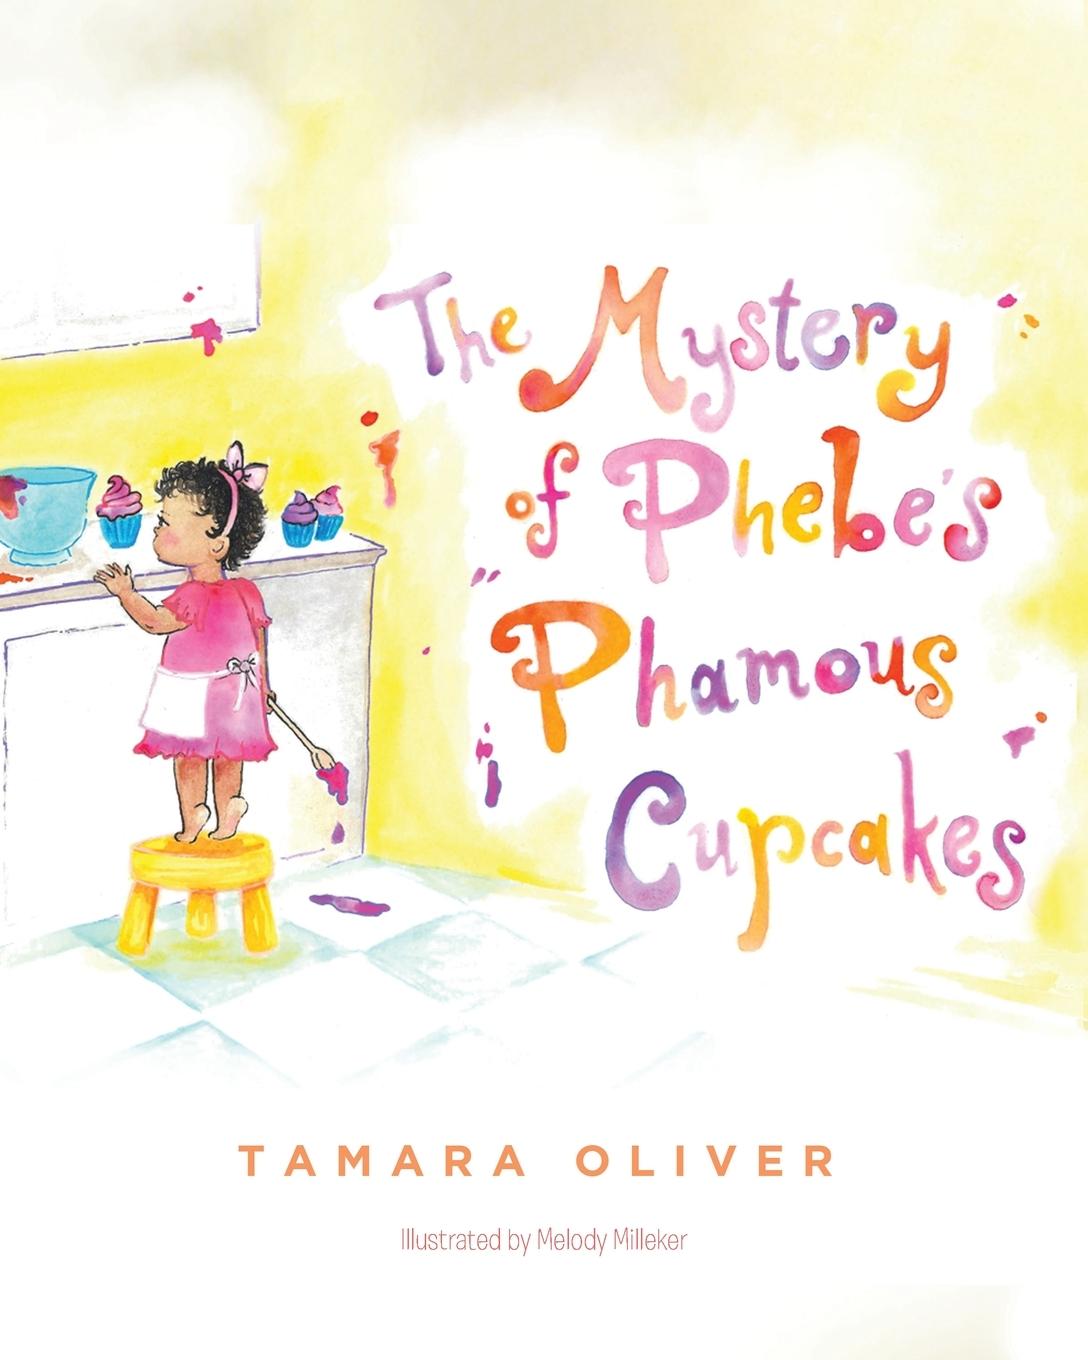 Book Mystery of Phebe's Phamous Cupcakes 